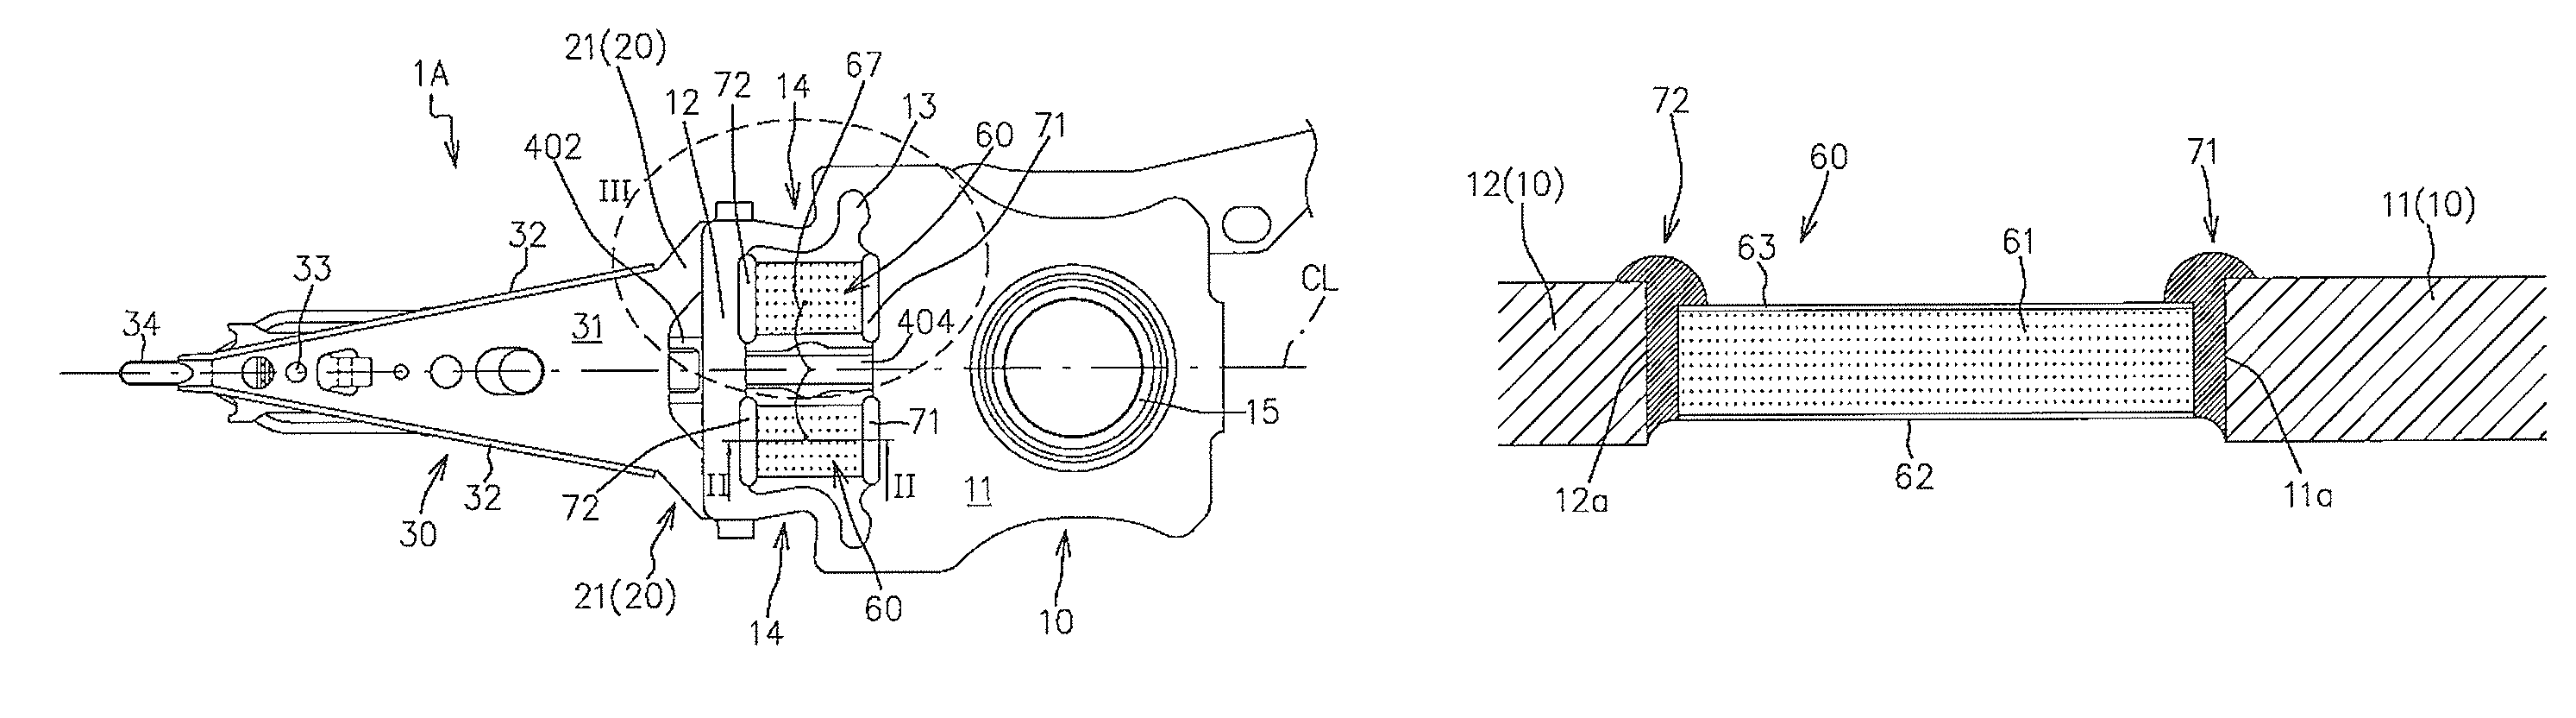 Magnetic head suspension for supporting piezoelectric elements in a non-facing manner relative to suspension structure